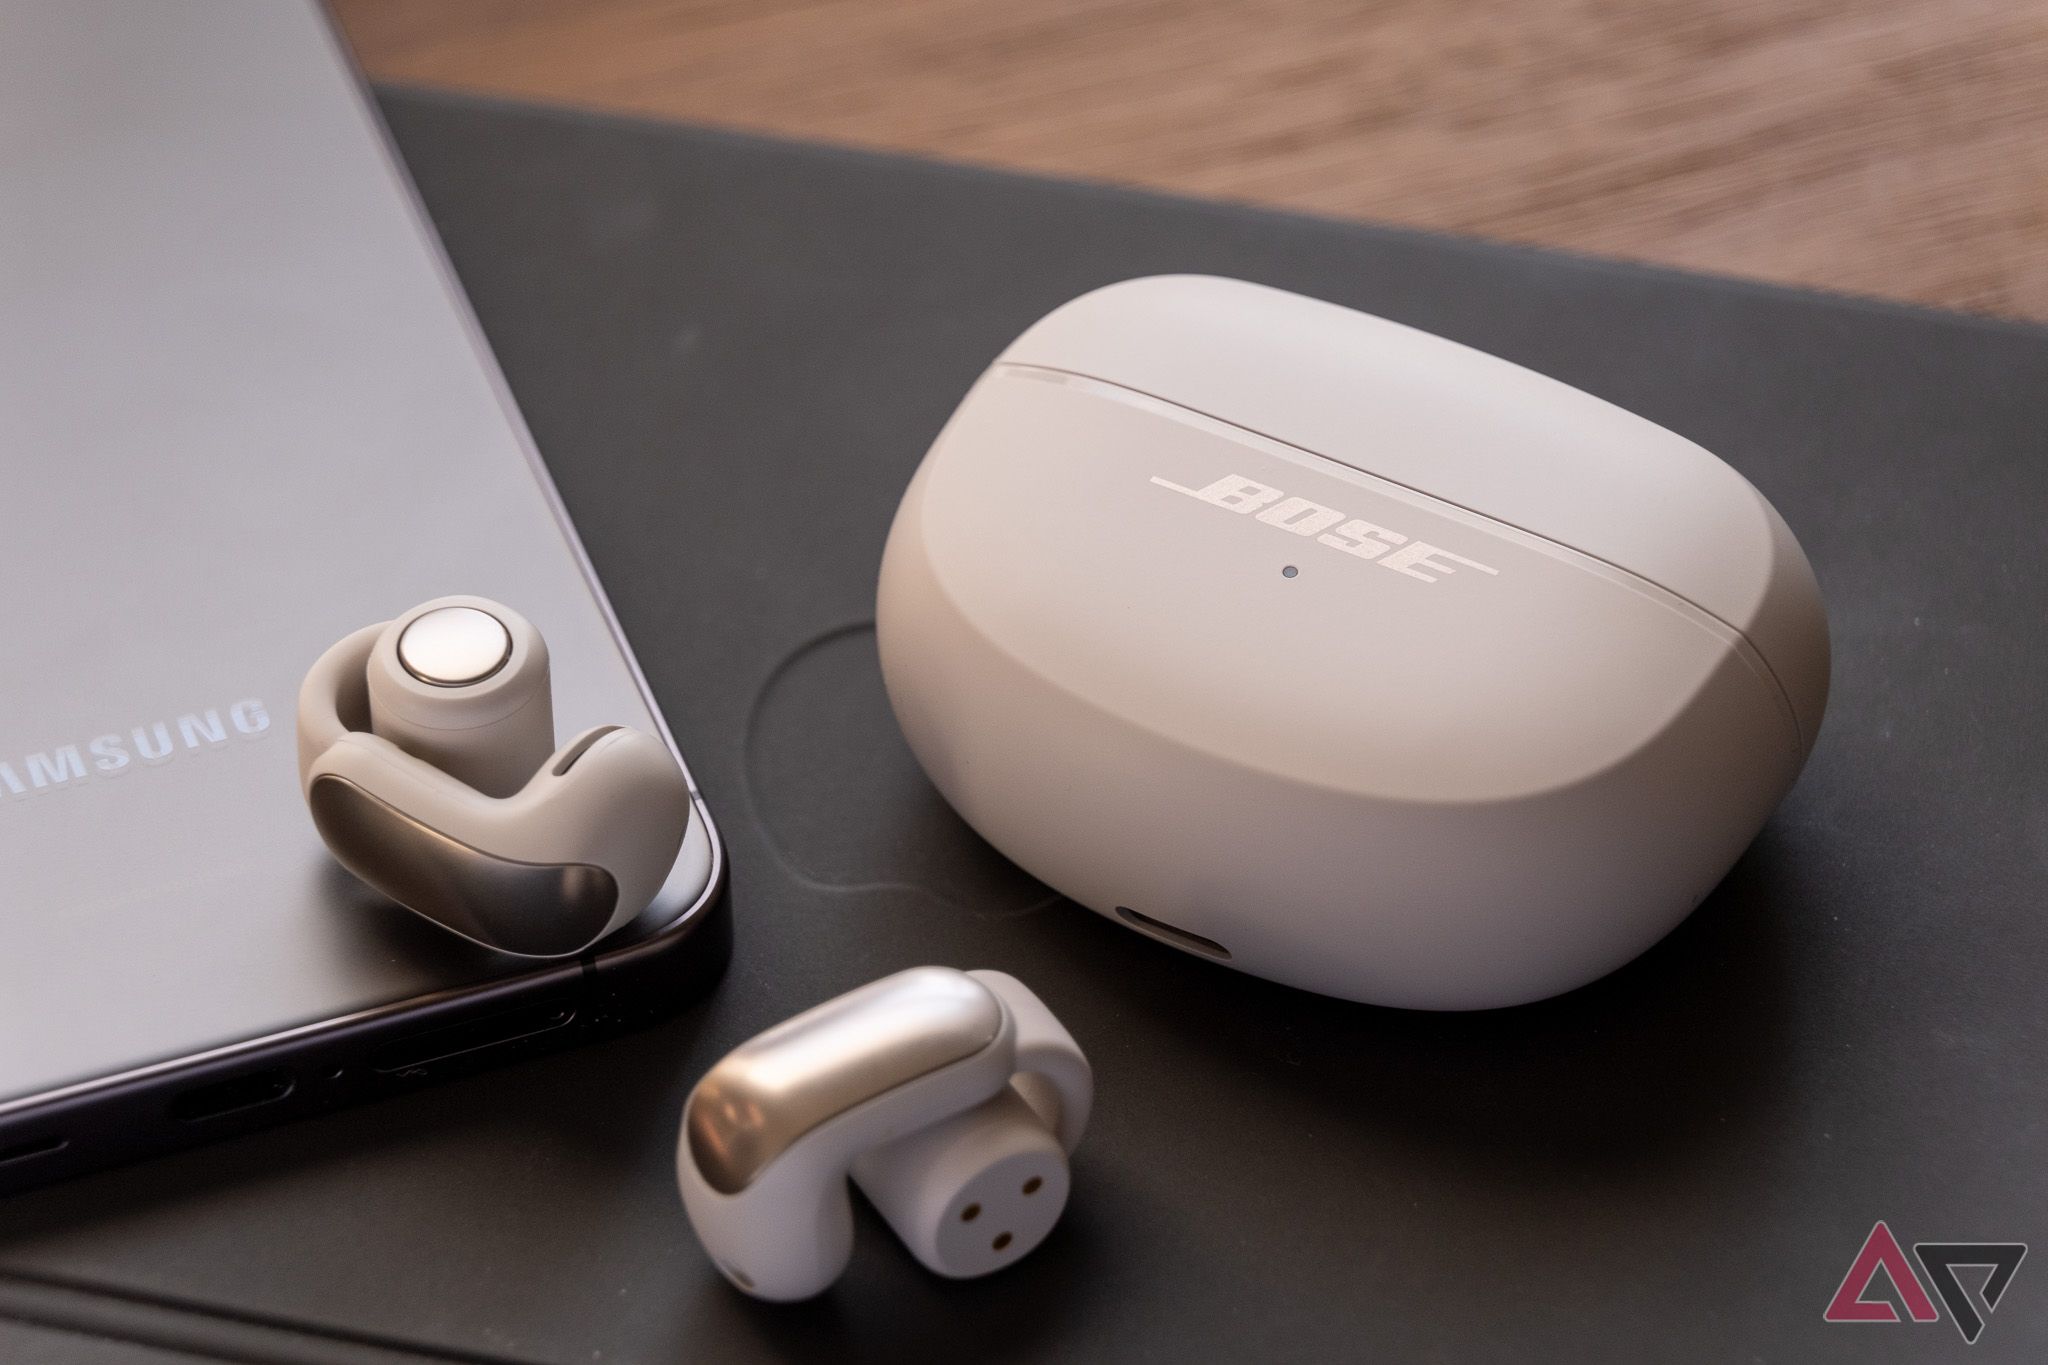 The Bose Ultra Open earbuds next to their case, sitting on top of an iPad